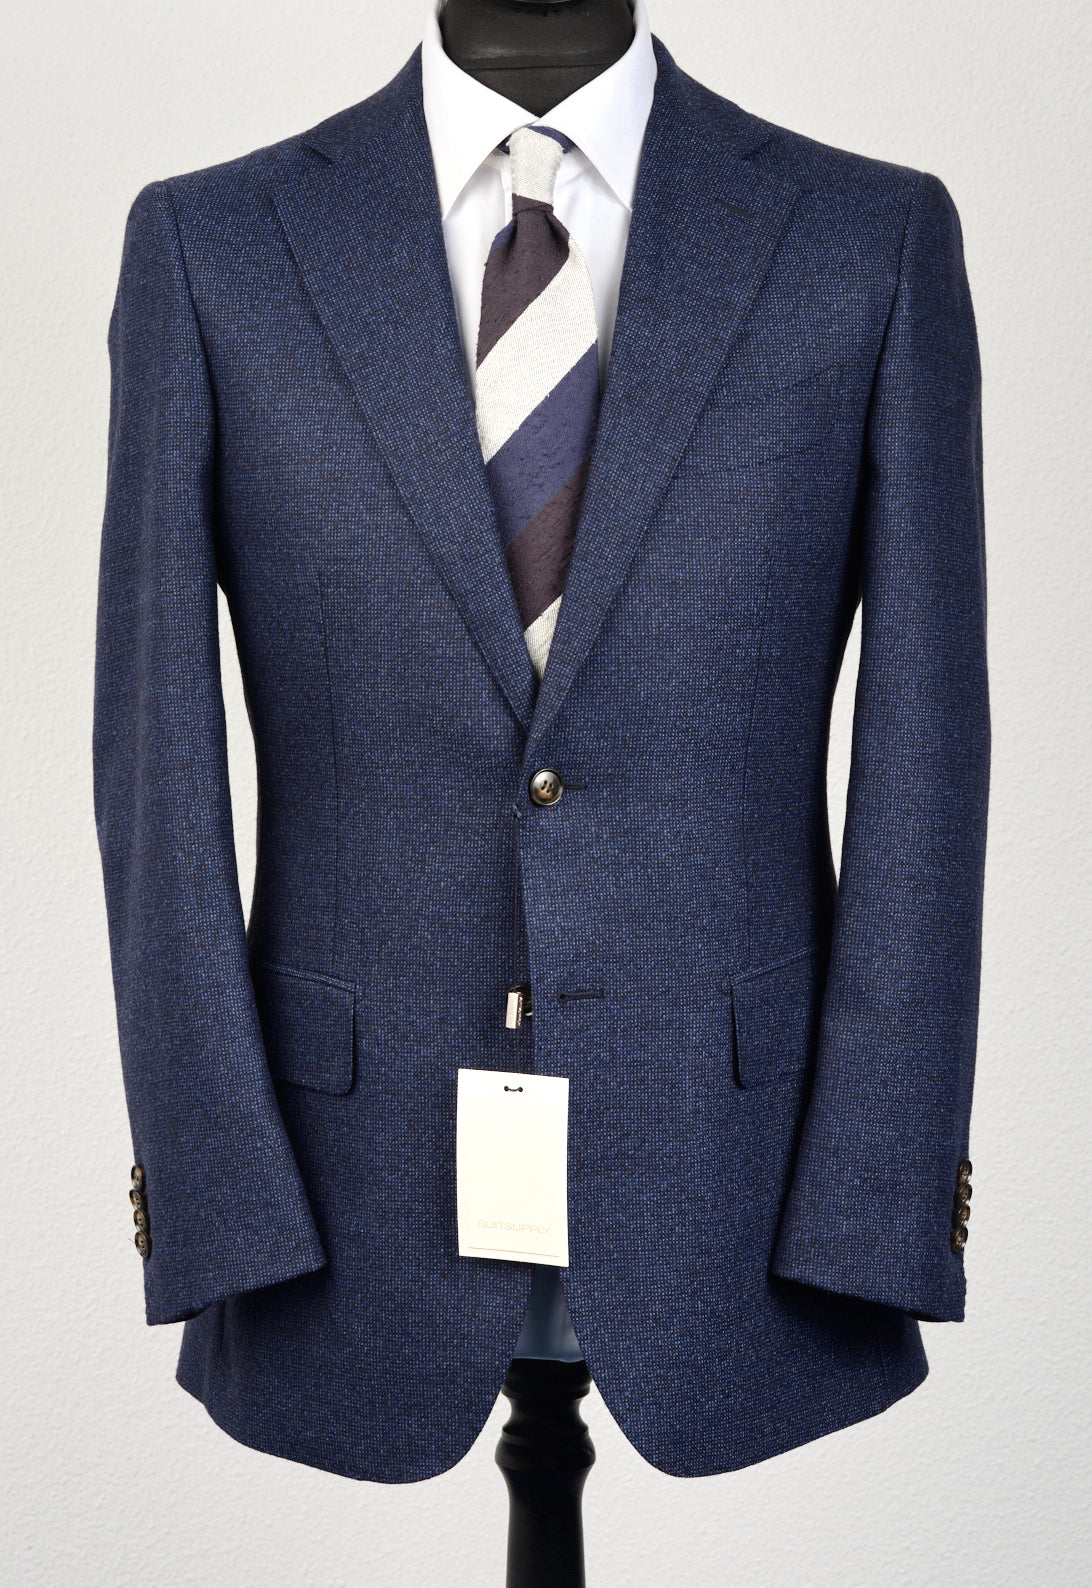 New Suitsupply Lazio Navy Pure Wool Flannel Suit - Size 36S and 44L